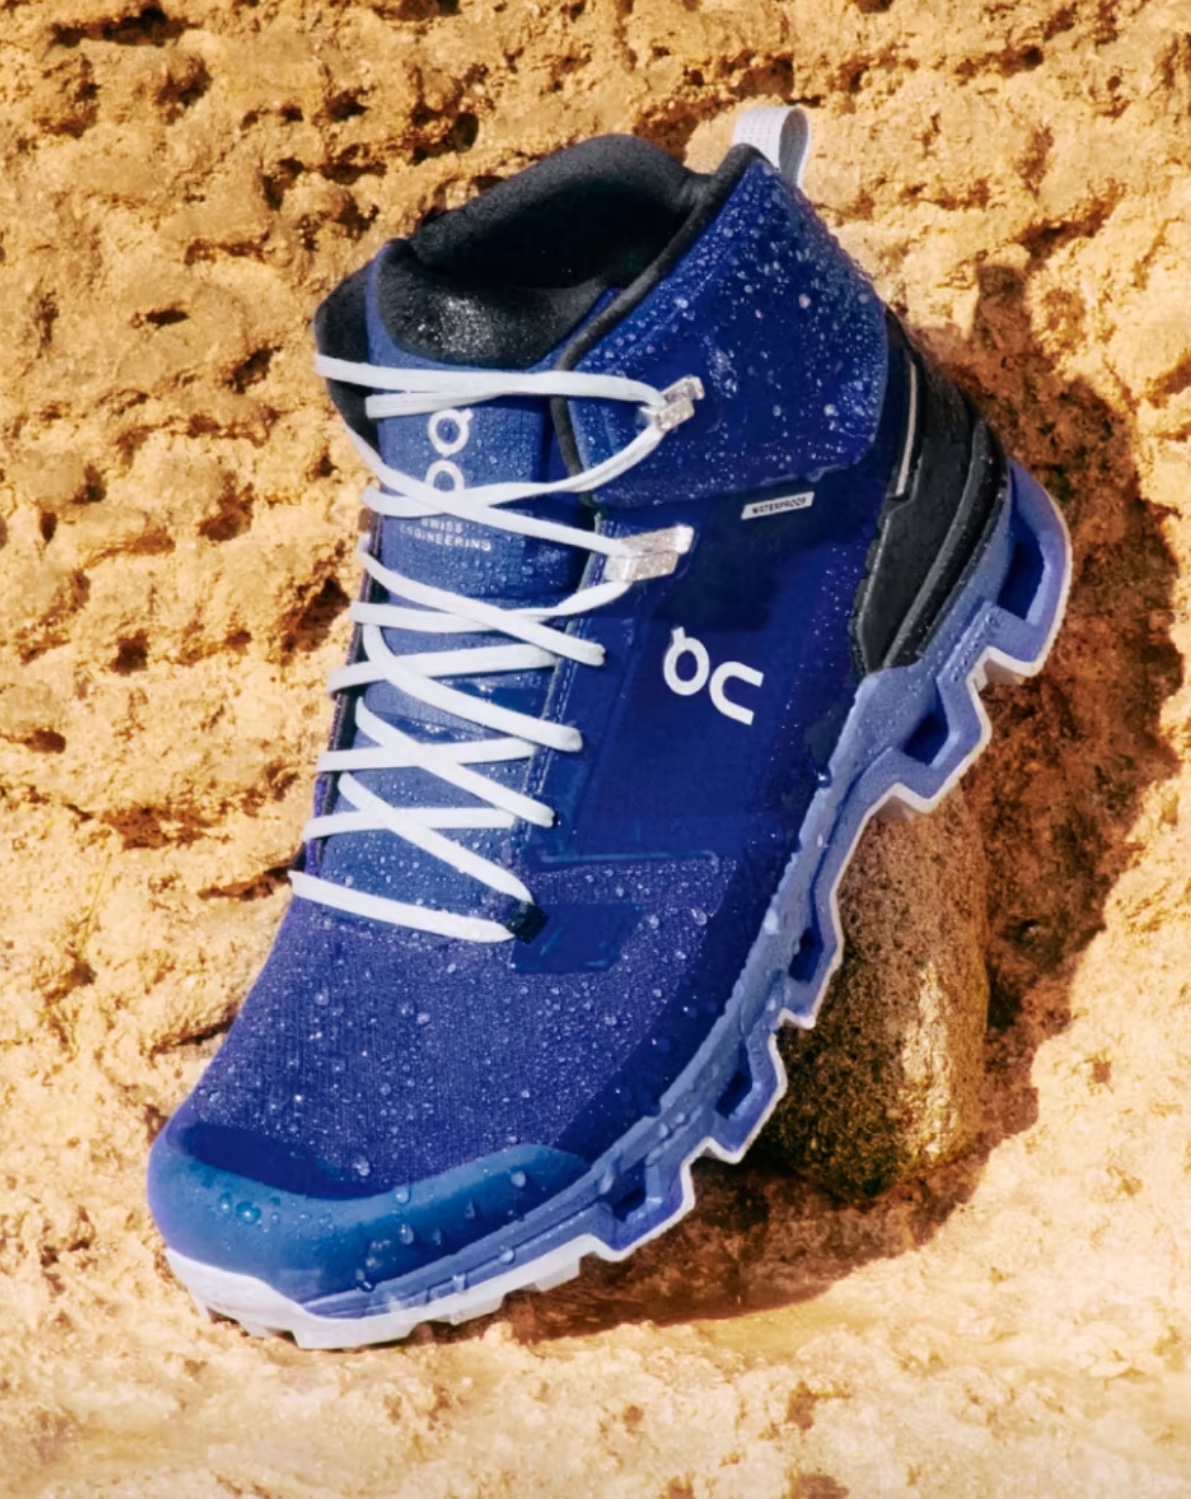 A blue On hiking boot in the sand.